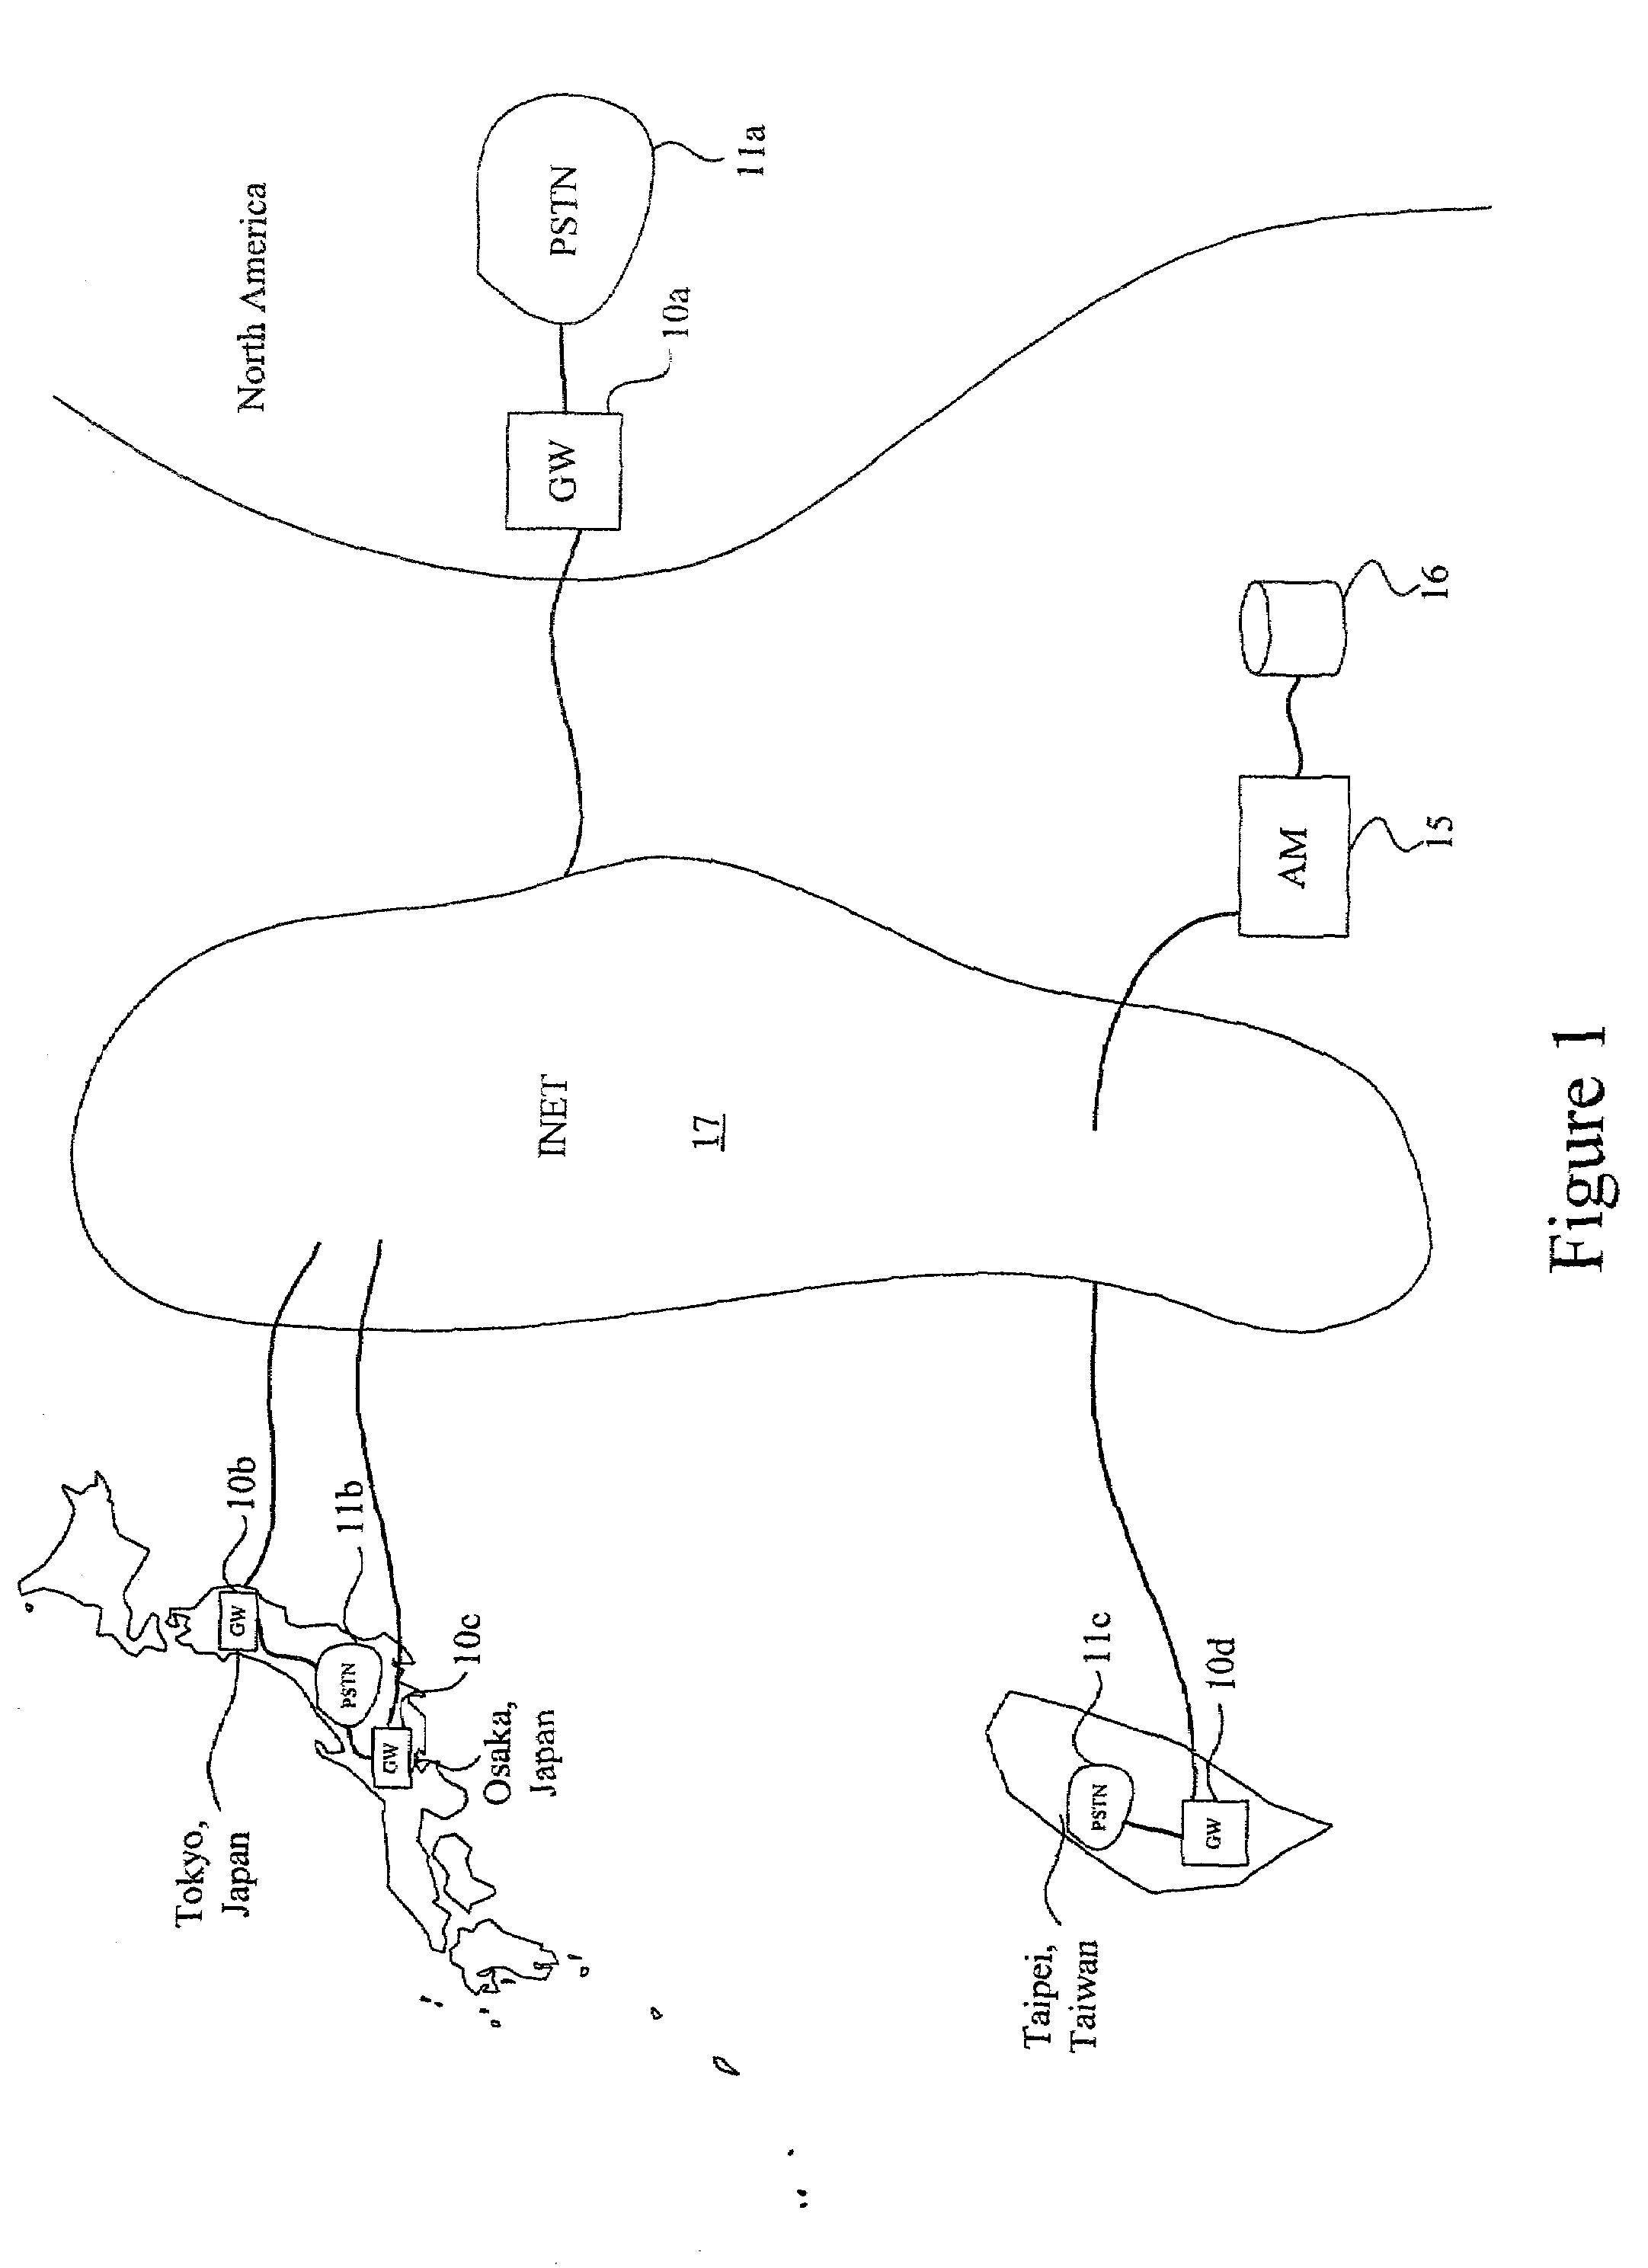 System and method for dynamically changing error algorithm redundancy levels